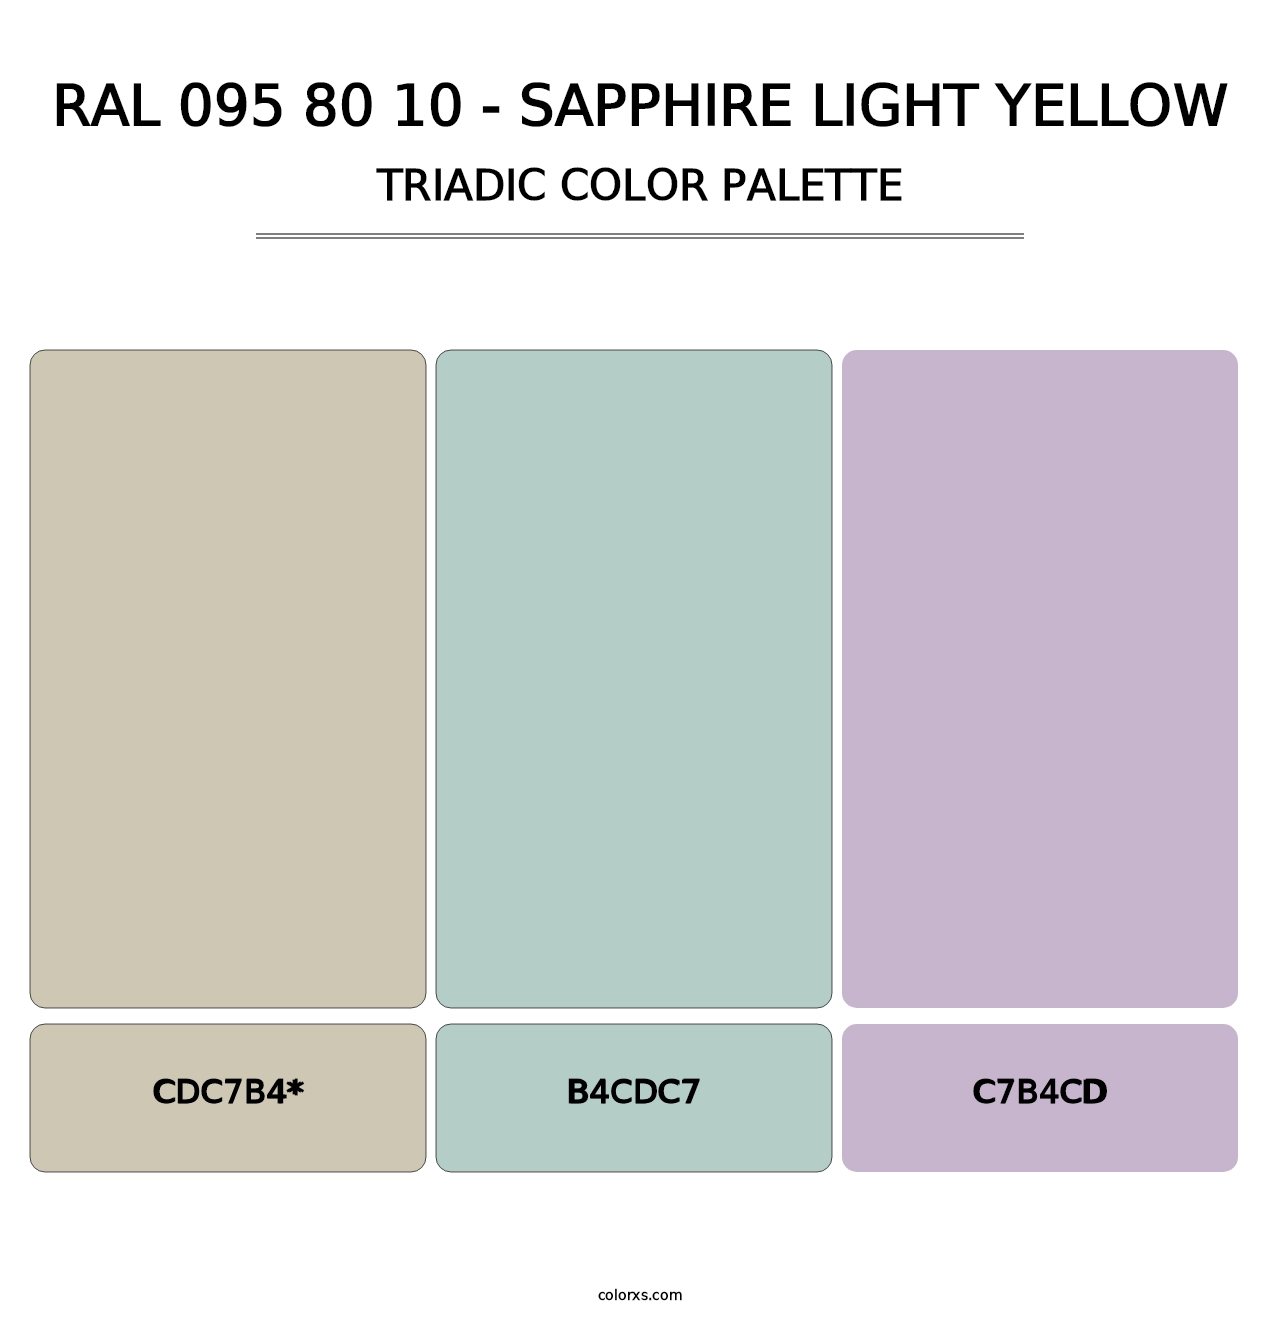 RAL 095 80 10 - Sapphire Light Yellow - Triadic Color Palette